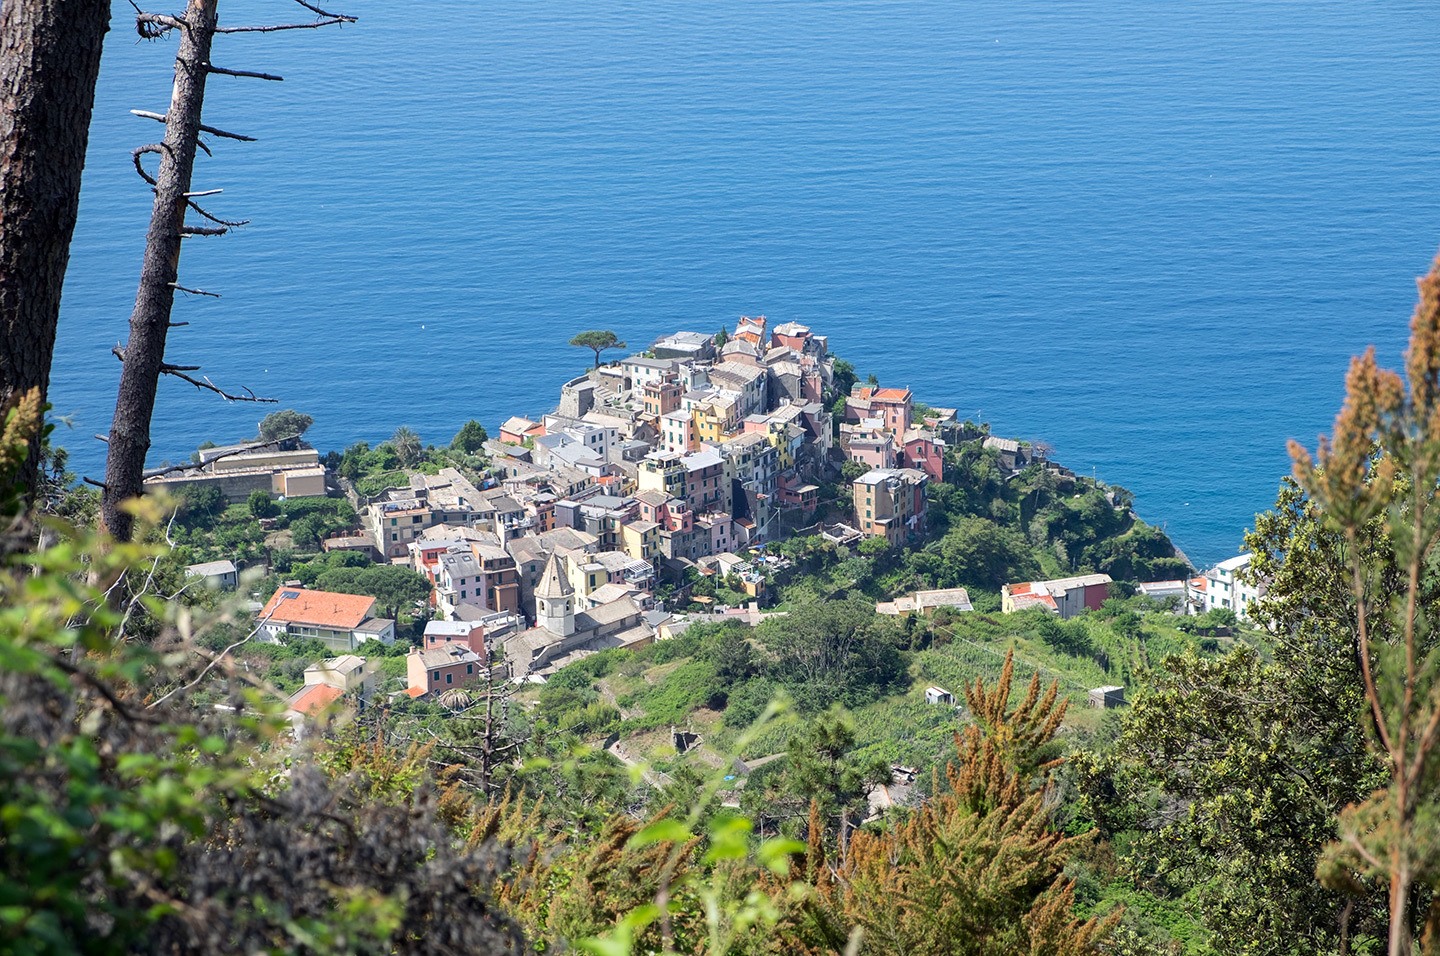 Looking down on Corniglia from above